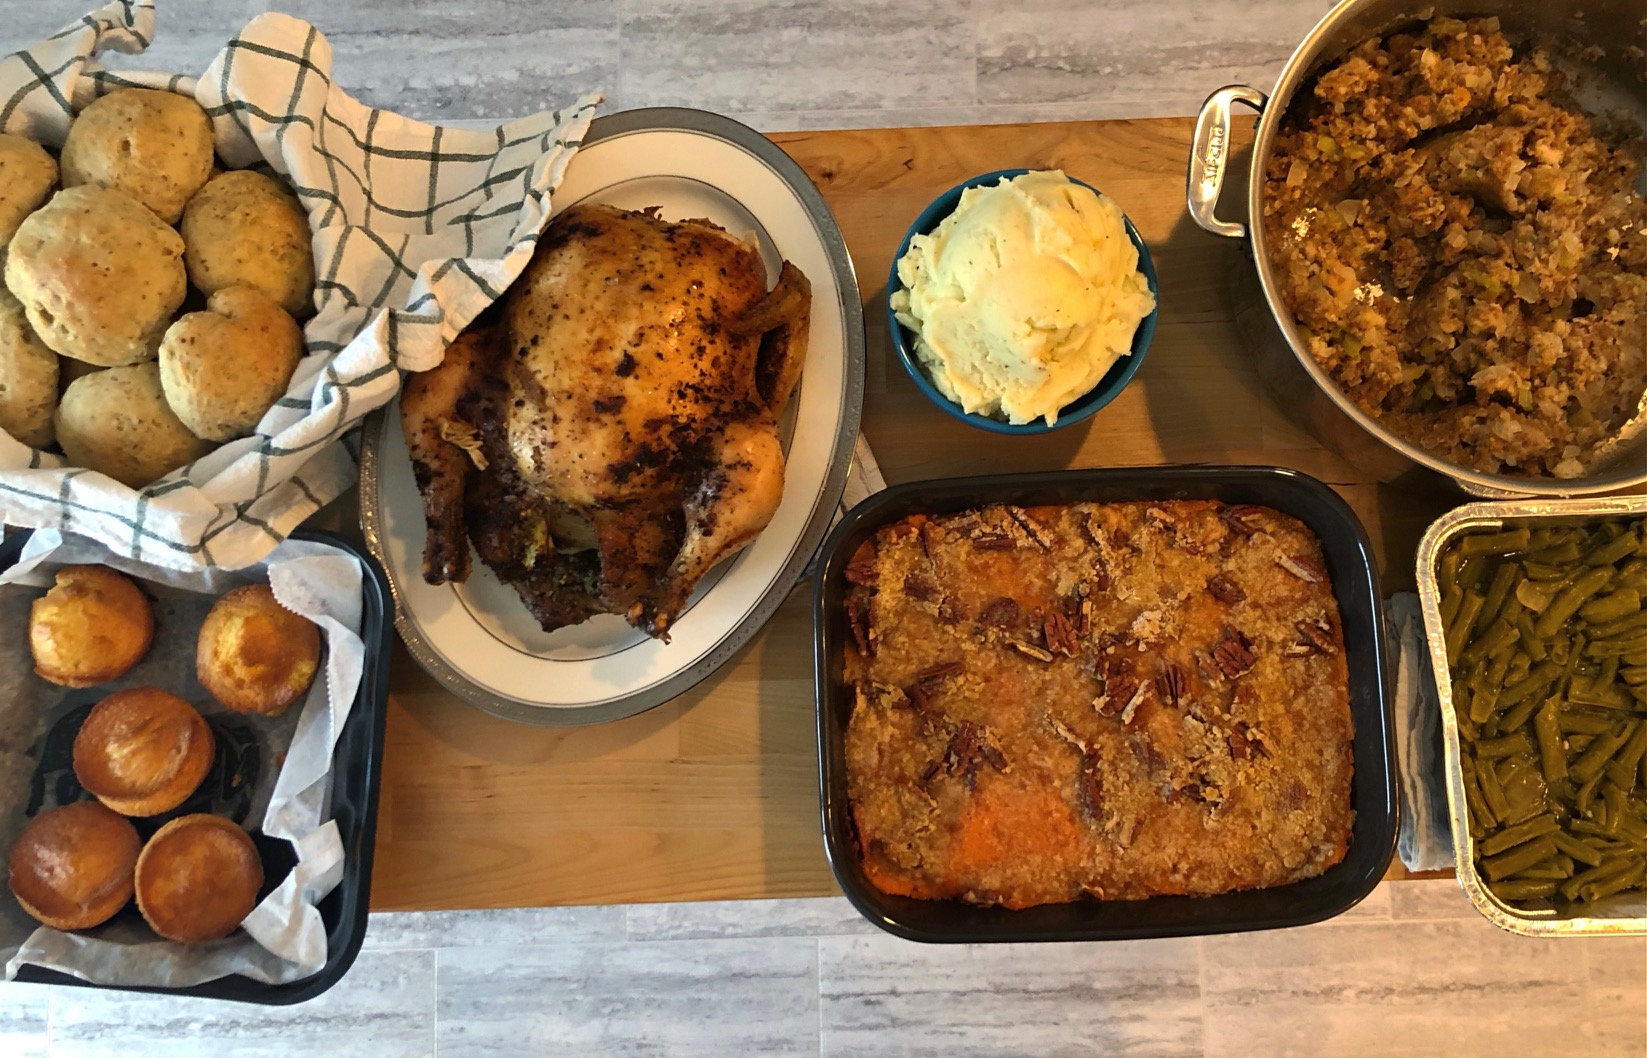 A Thanksgiving dinner table as seen from above. On the wood table are two different types of rolls, a roasted turkey, mashed potatoes, sweet potato casserole, stuffing, and green beans. Photo by Alyssa Buckley.